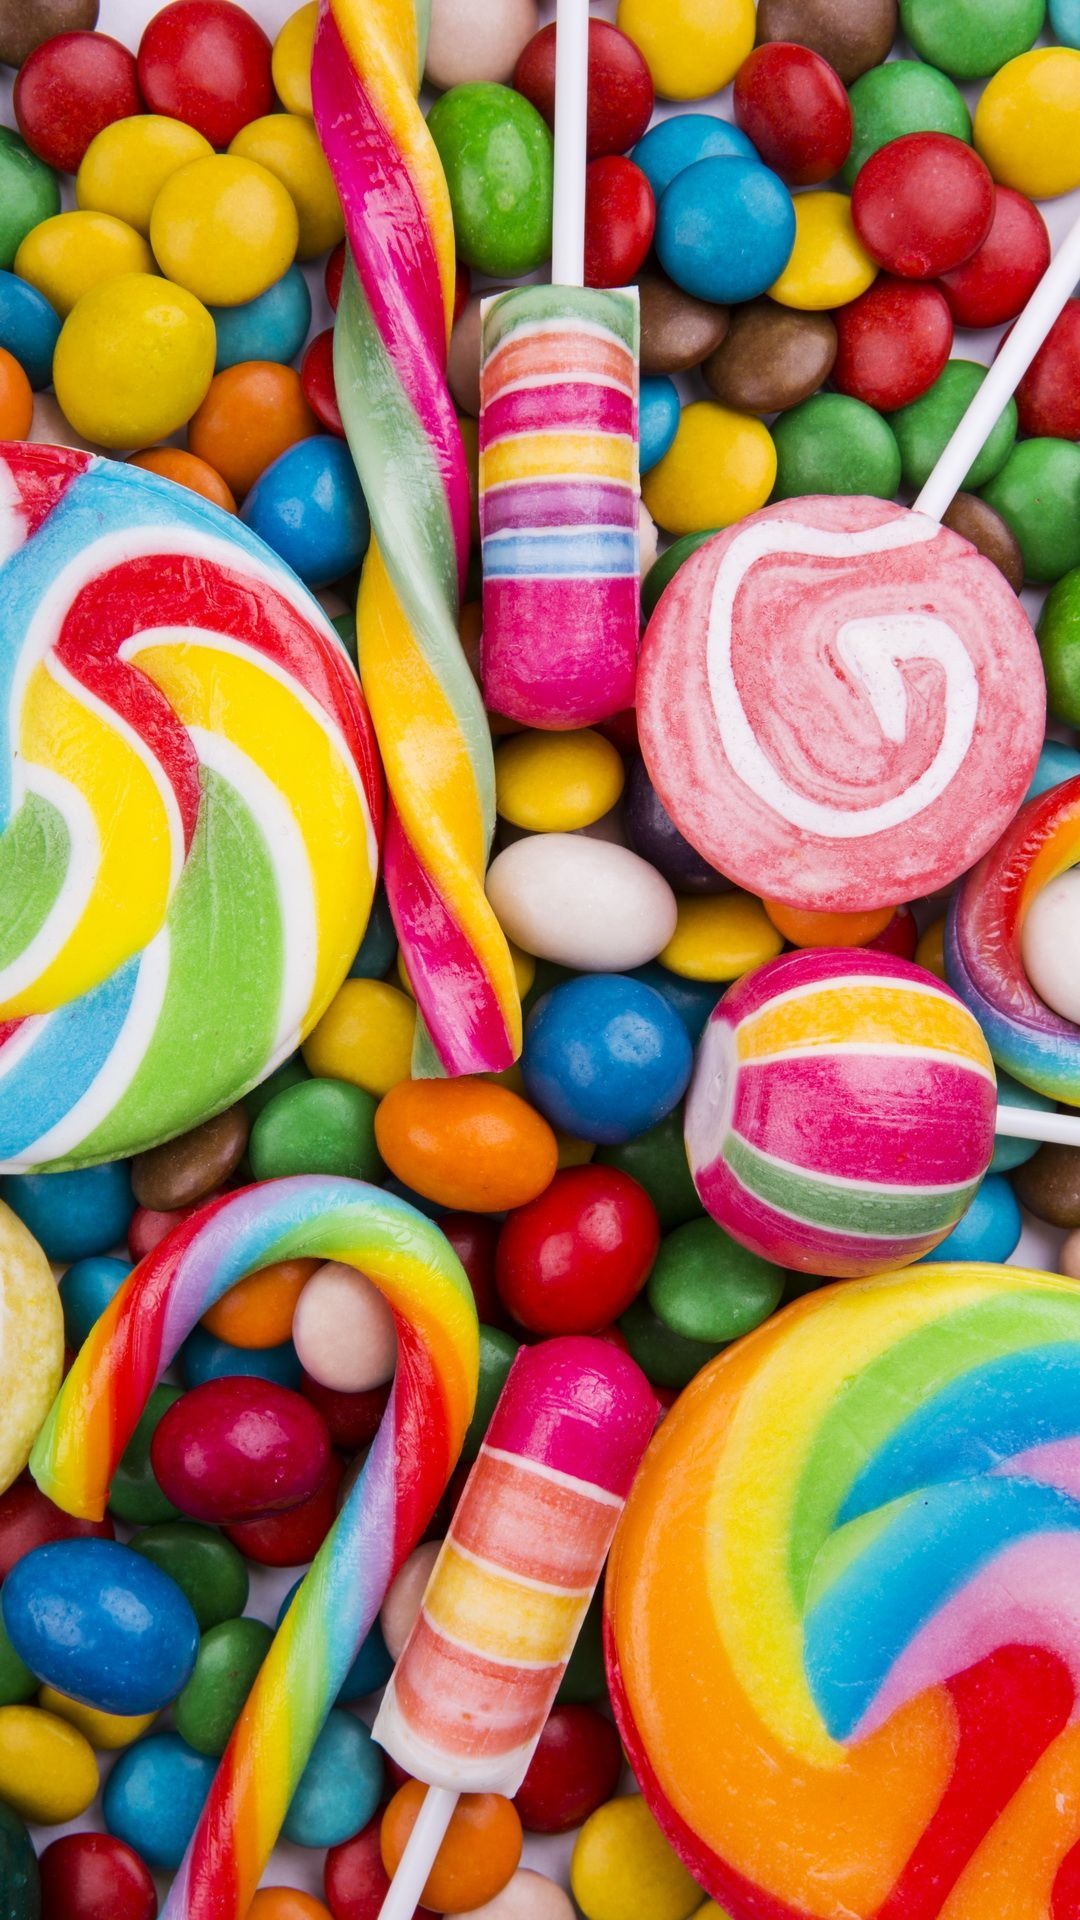 Candies wallpaper, Colorful and vibrant, Irresistible treats, Mouthwatering delight, 1080x1920 Full HD Handy